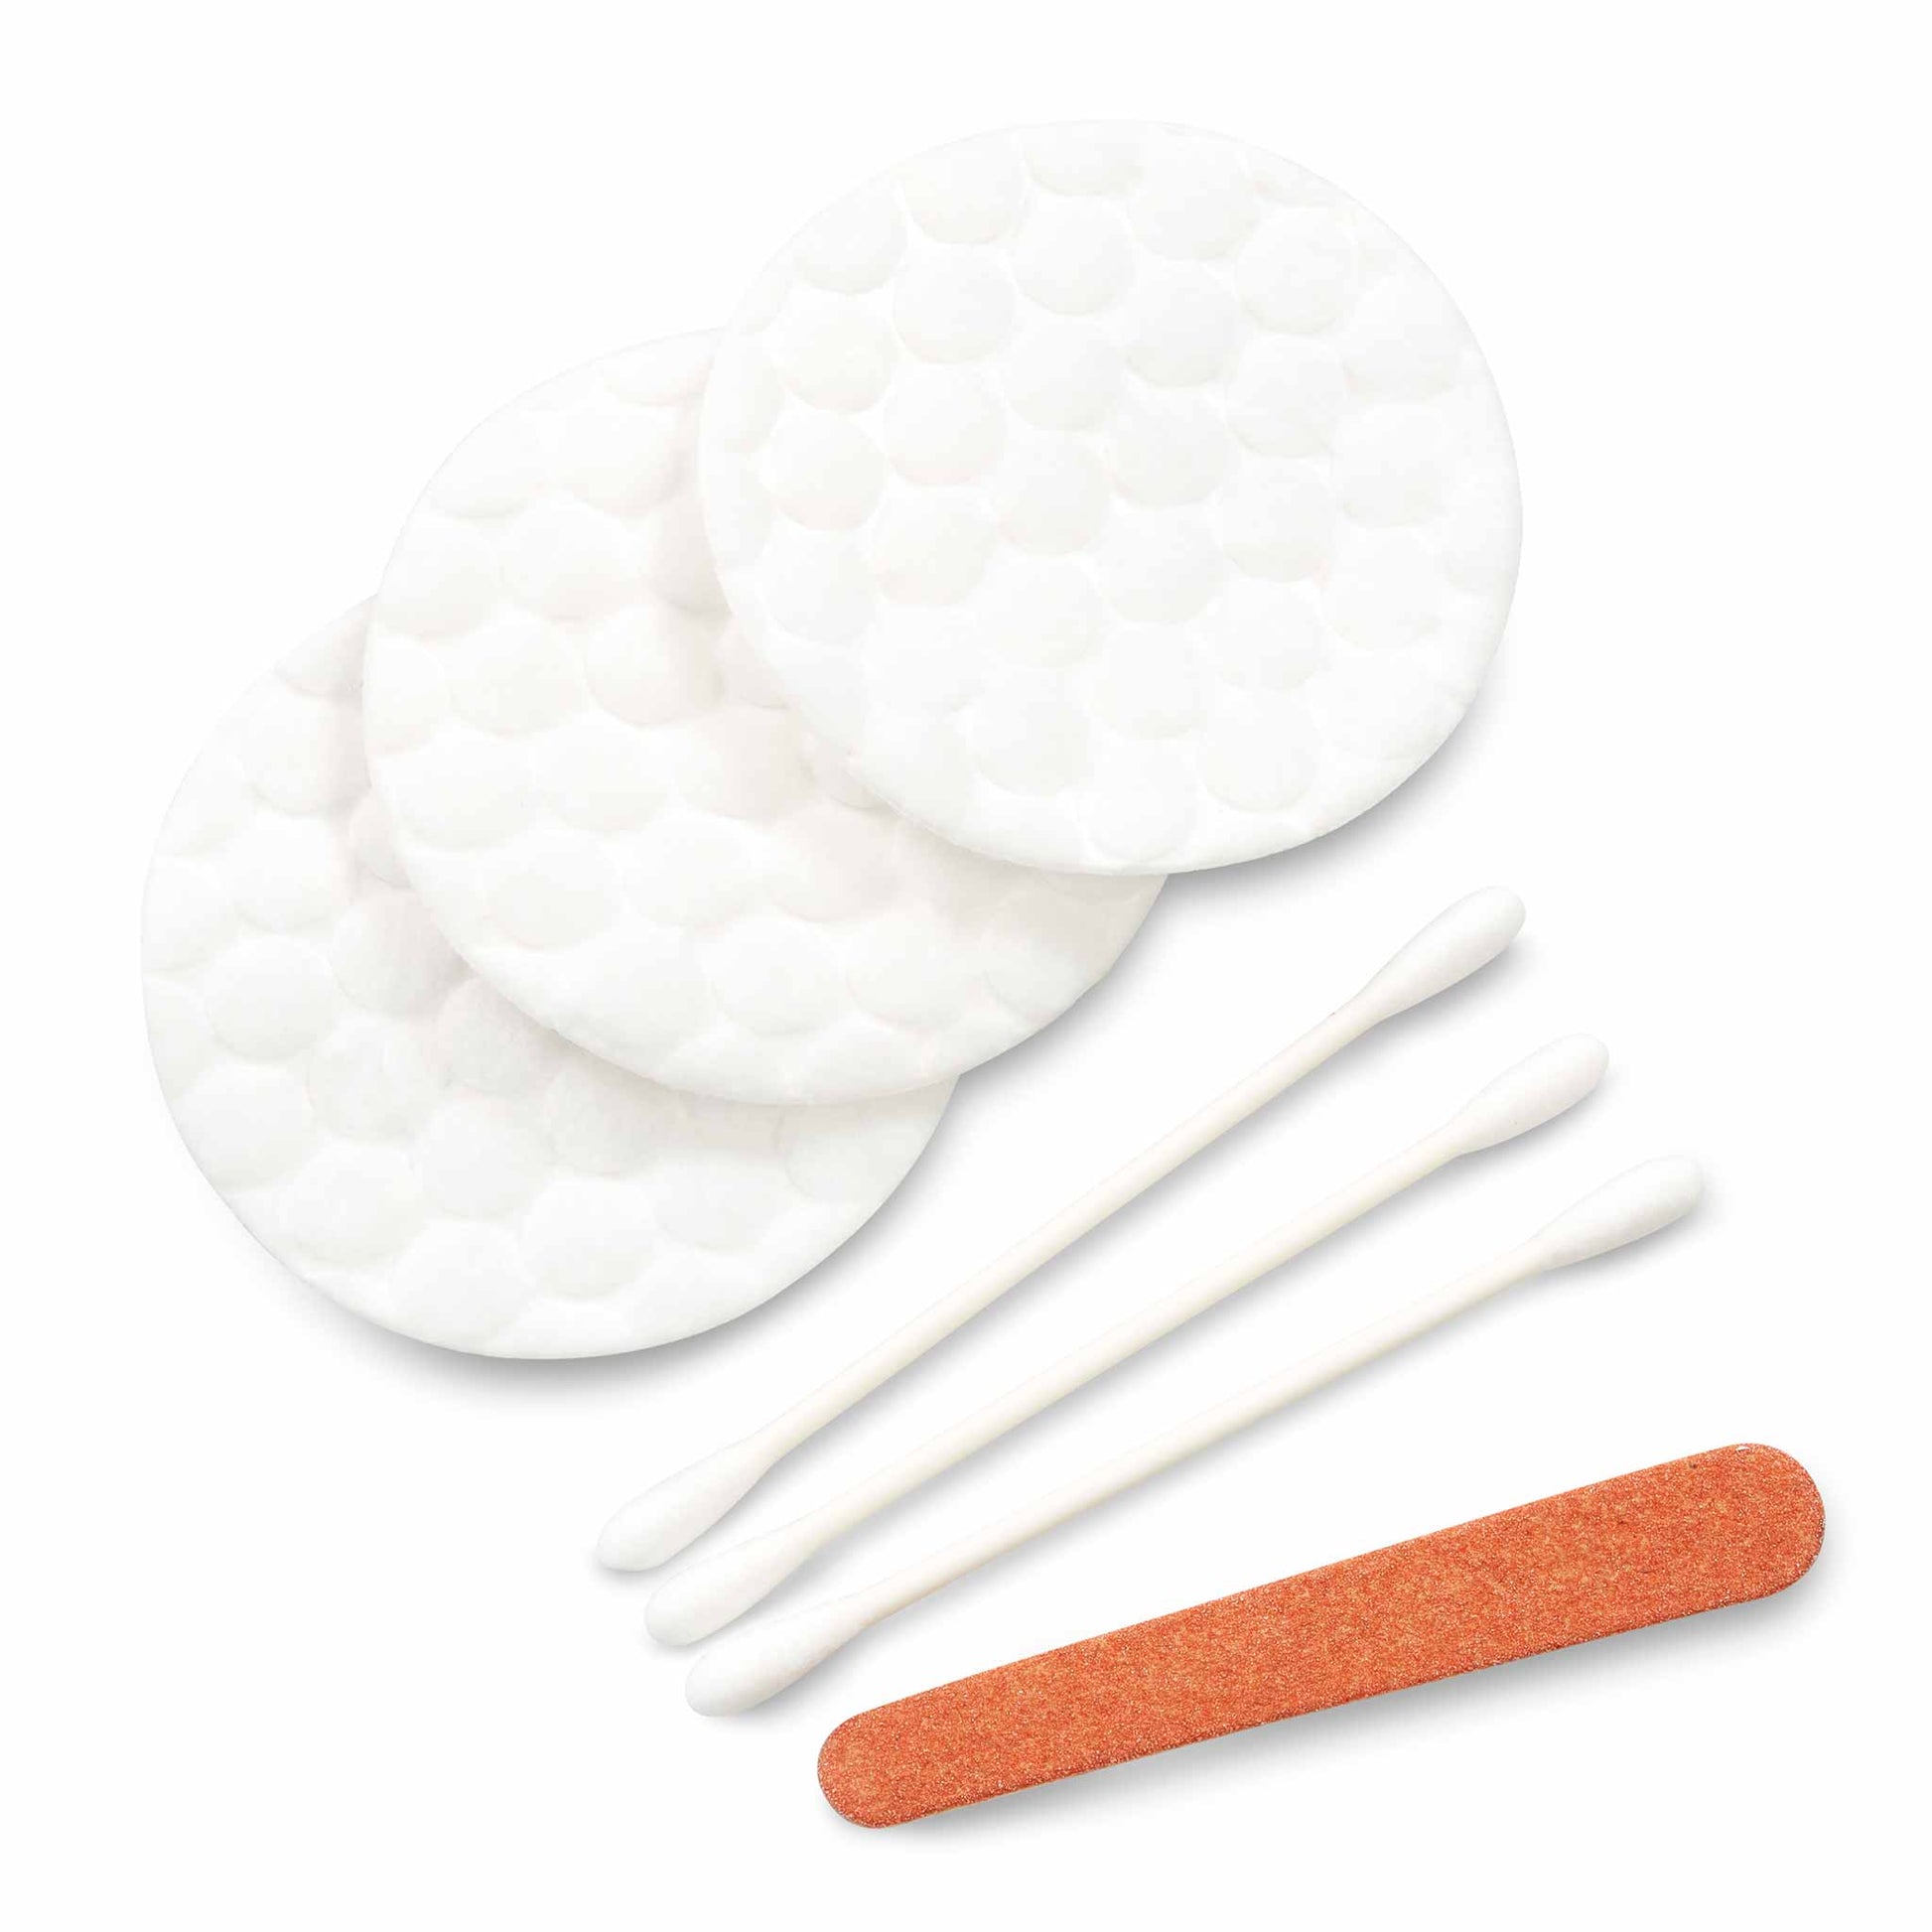 Vanity kit cotton pads, cotton buds and nail file